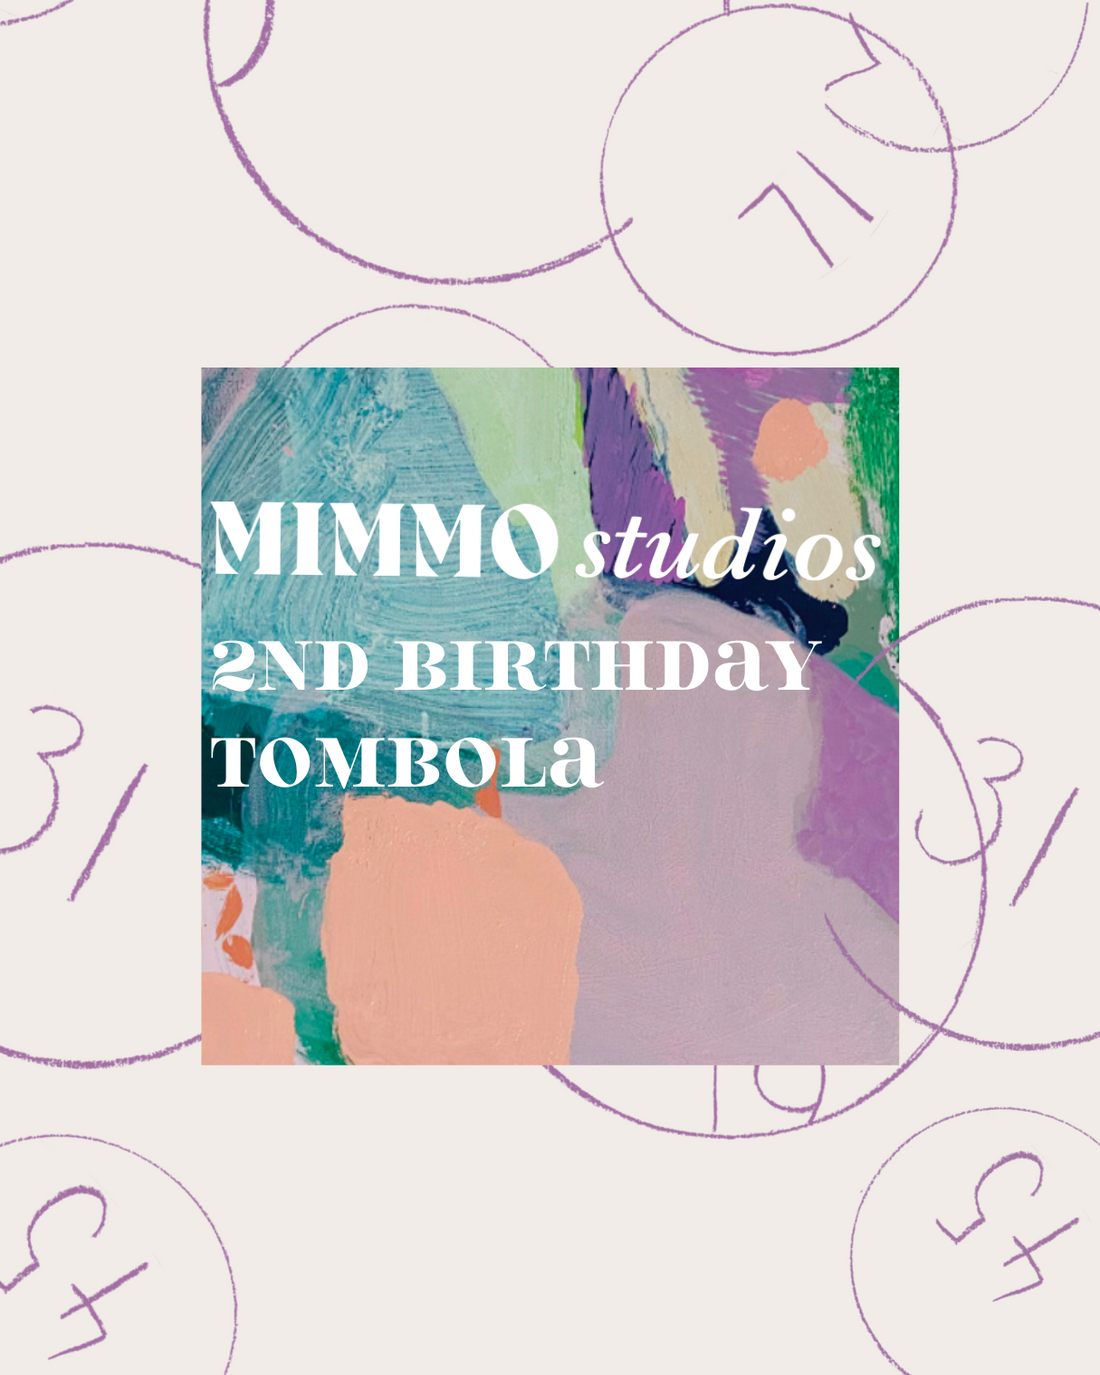 The MIMMO Studios 2nd Birthday Tombola